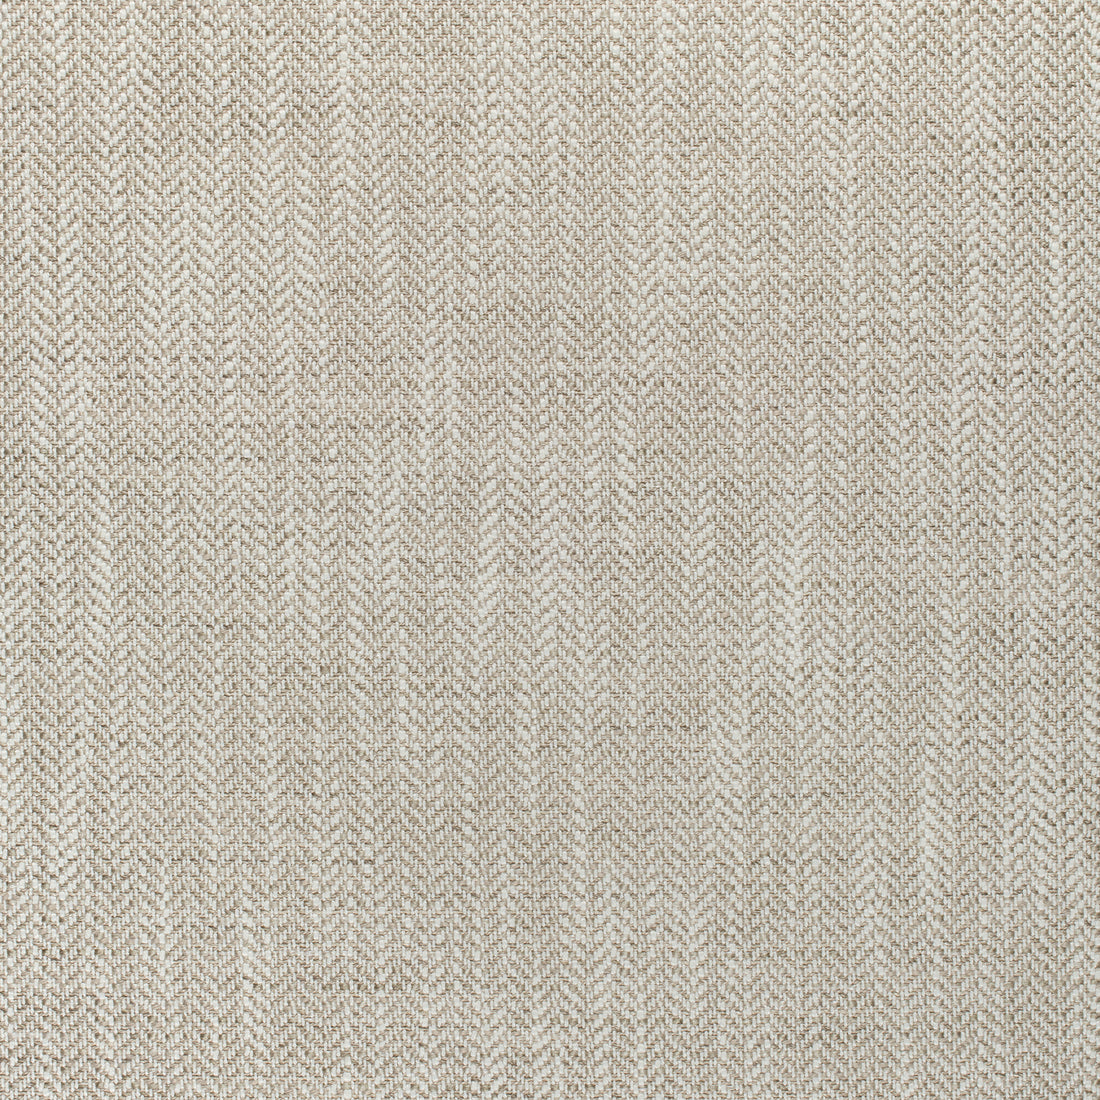 Ashbourne Tweed fabric in linen color - pattern number W80607 - by Thibaut in the Pinnacle collection